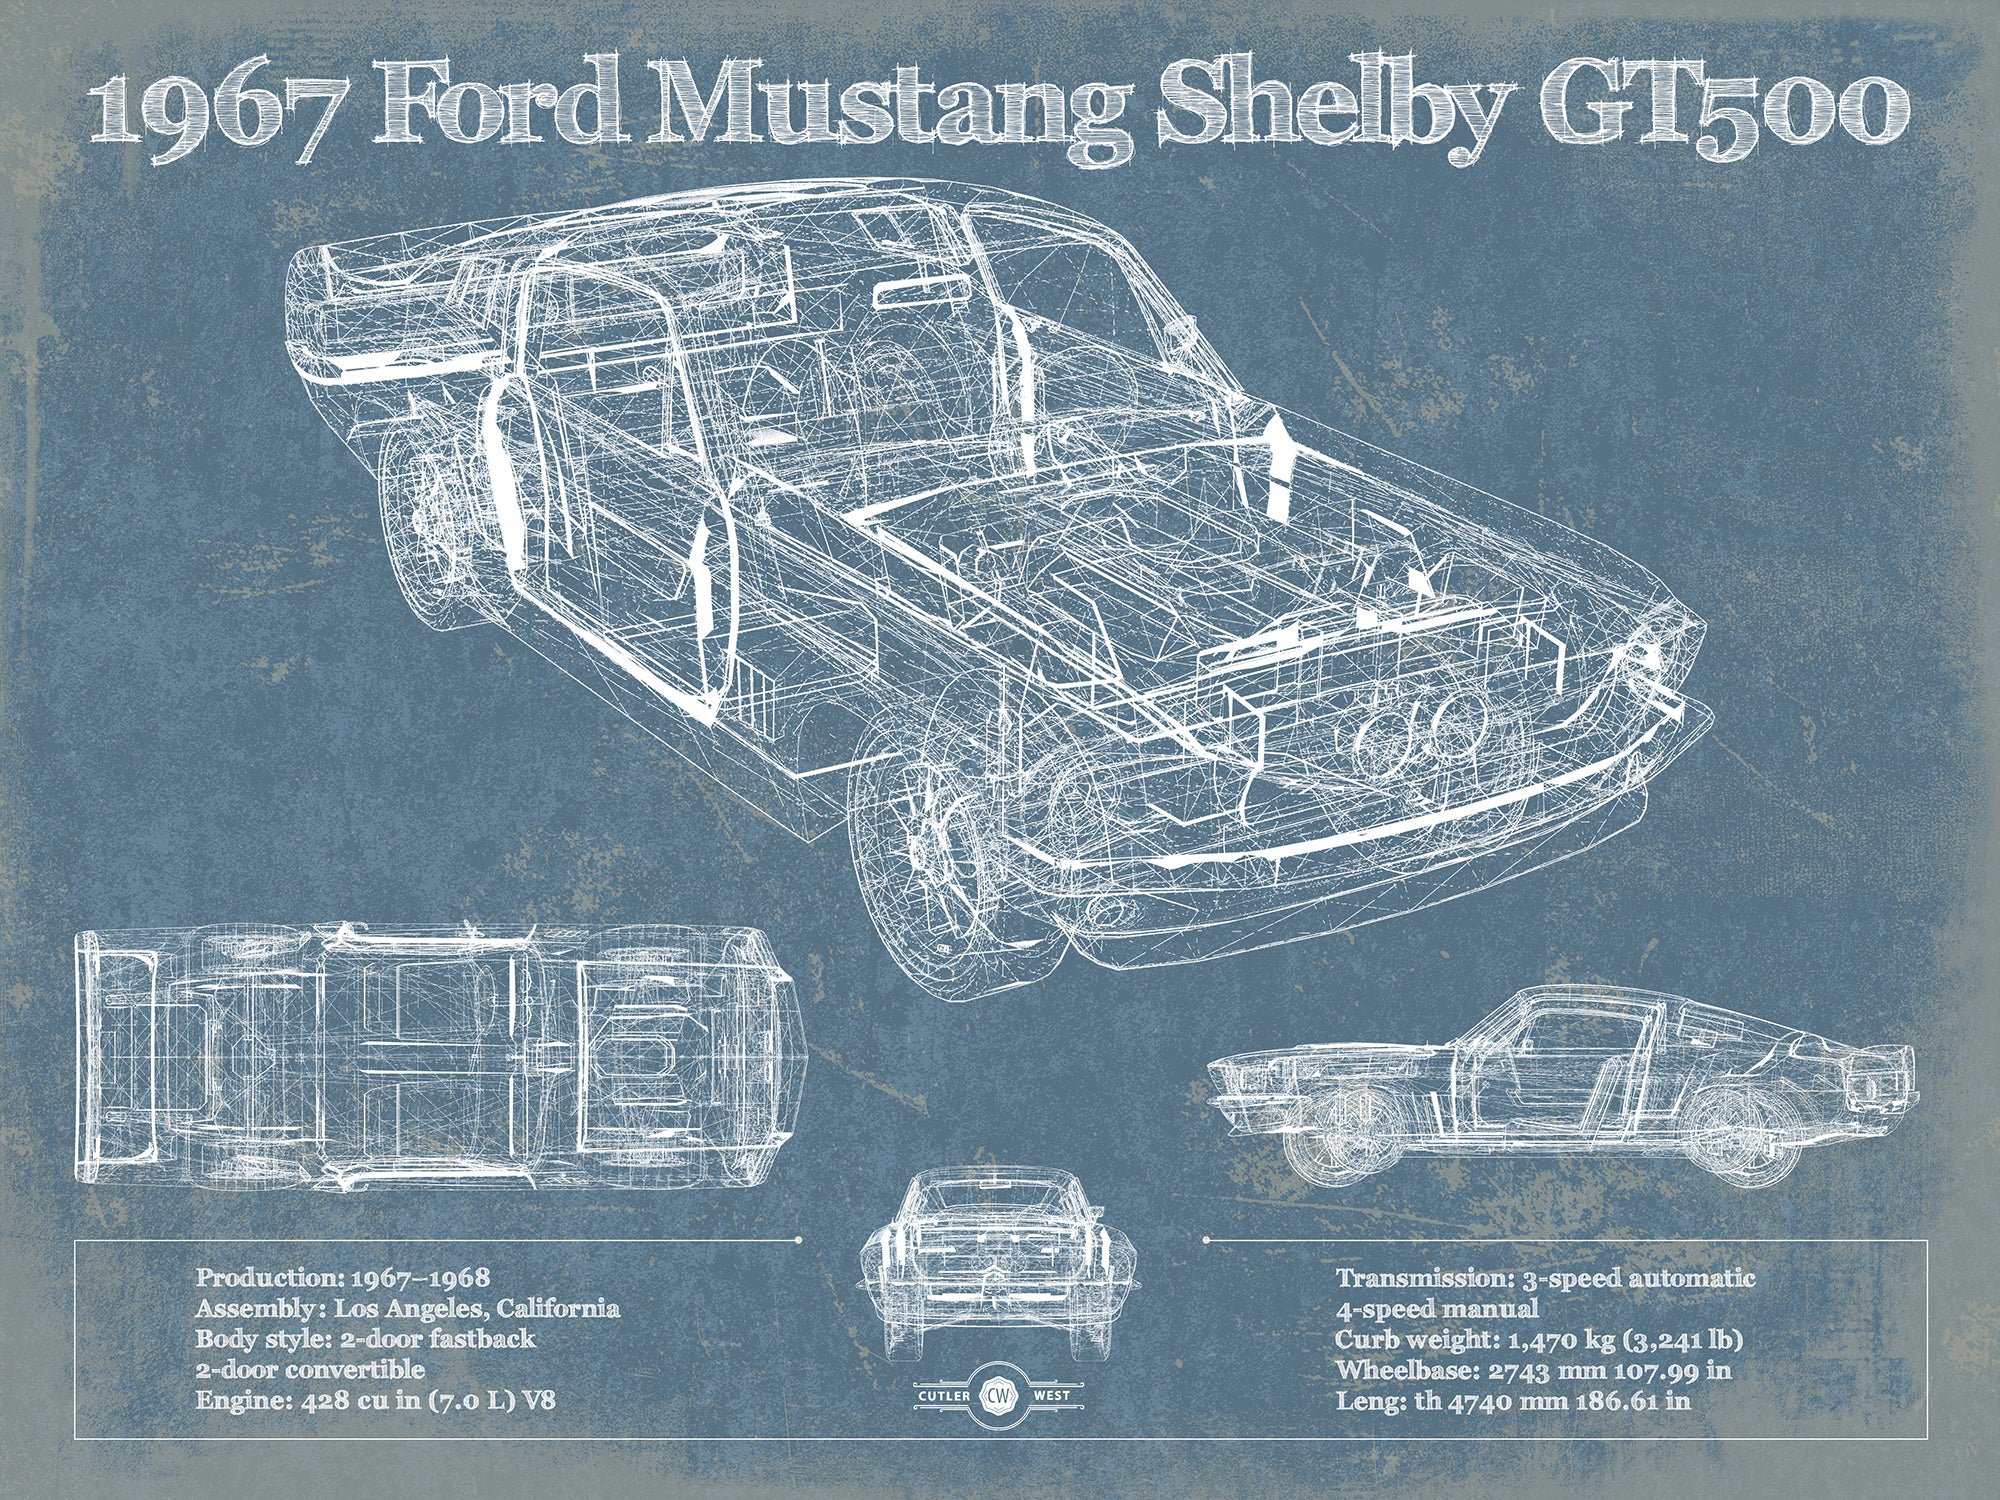 1967 Ford Mustang Shelby GT500 Vintage Blueprint Auto Print